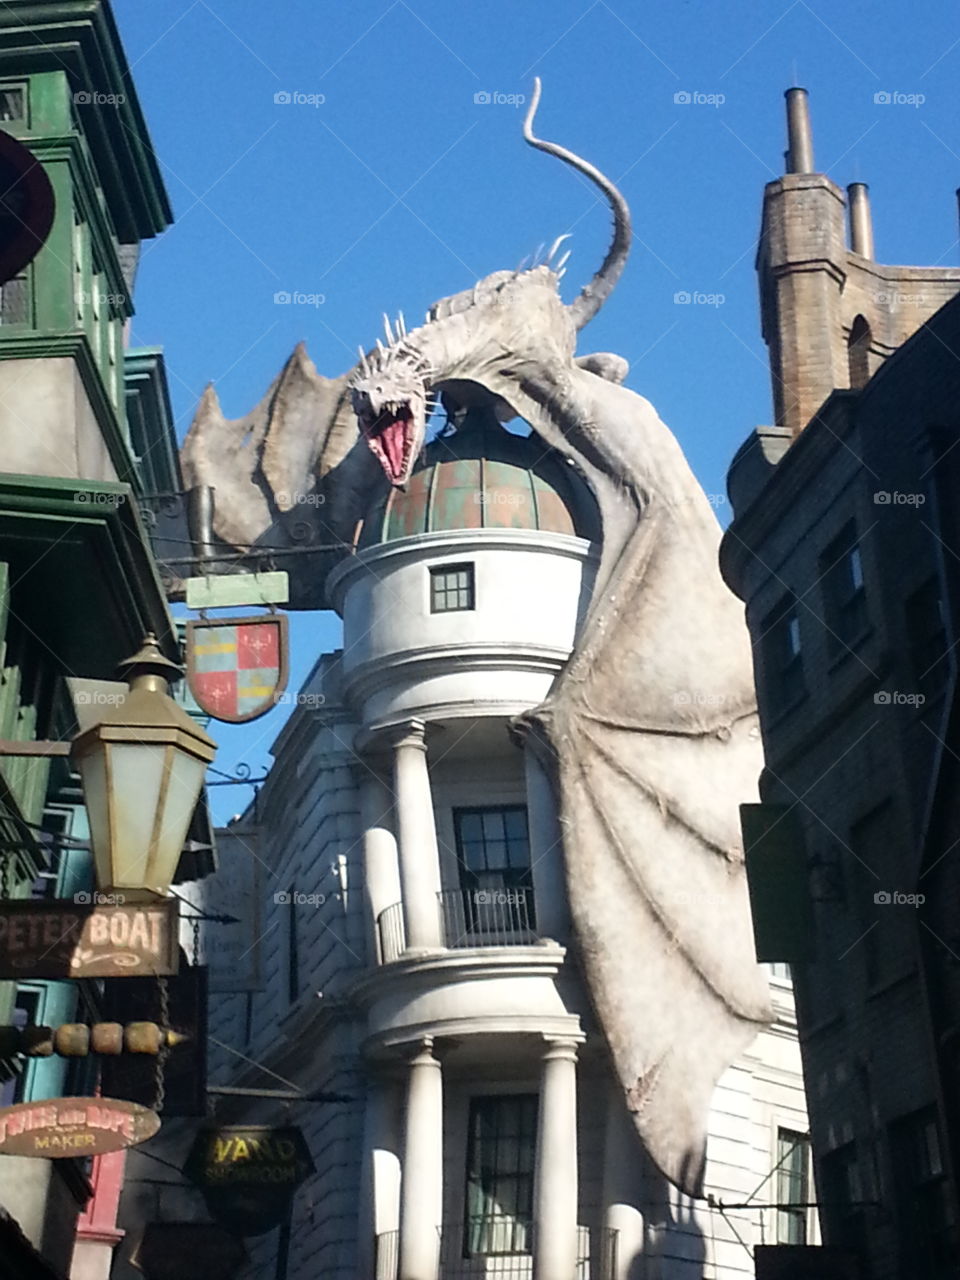 Harry potter Dragon. went to universal waiting to see flames covenant of dragons mouth